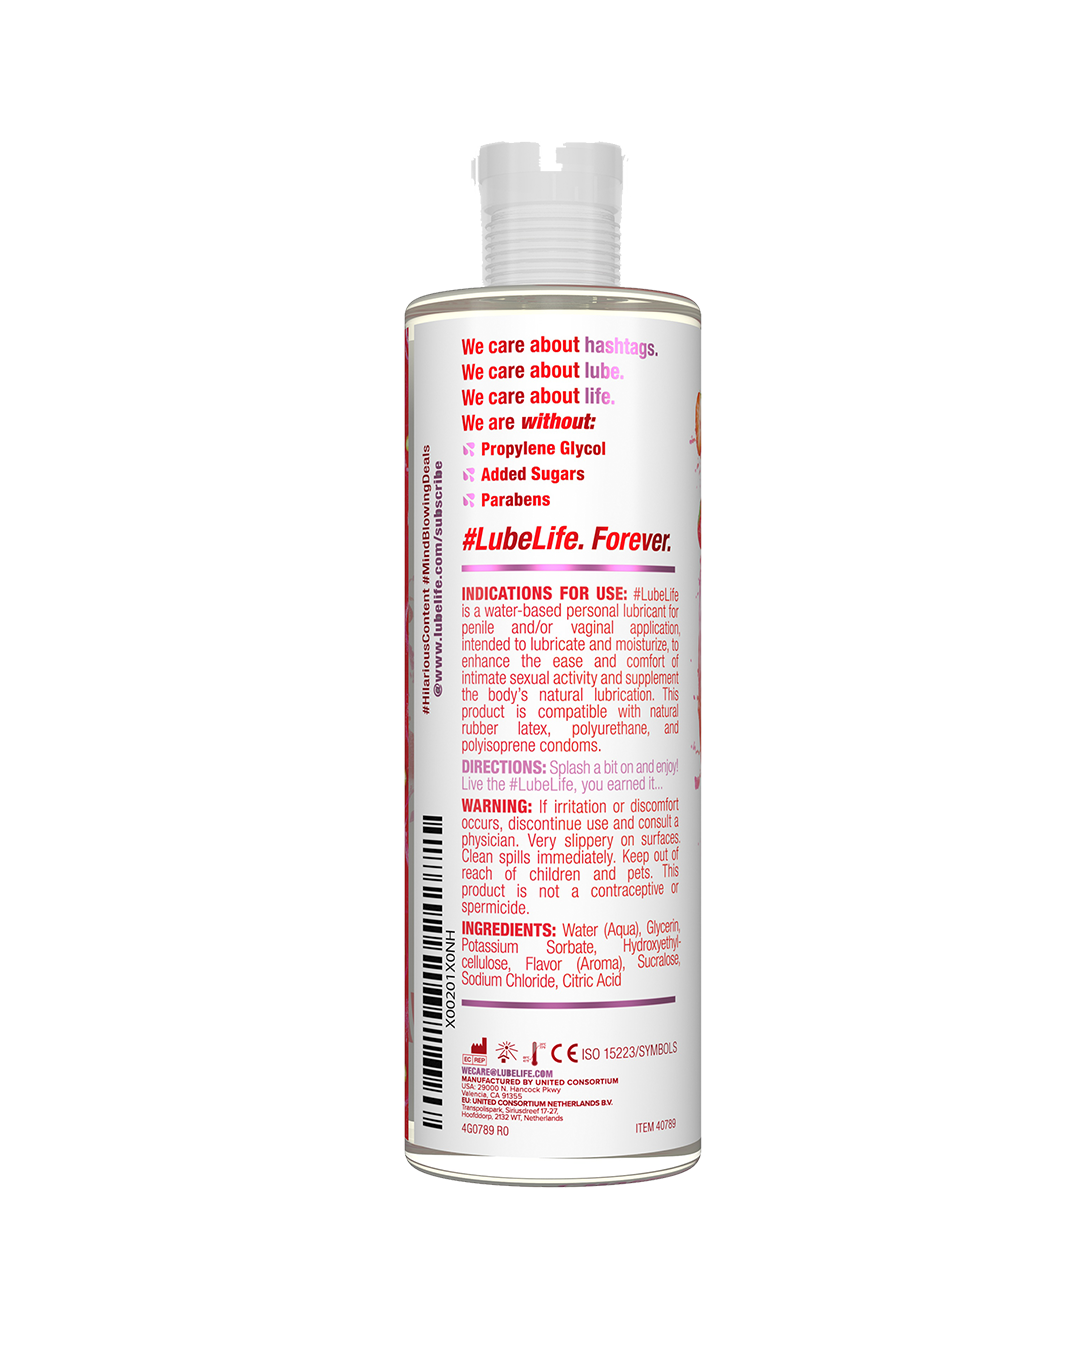 LubeLife Water-Based Strawberry Flavored Lubricant, Personal Lube